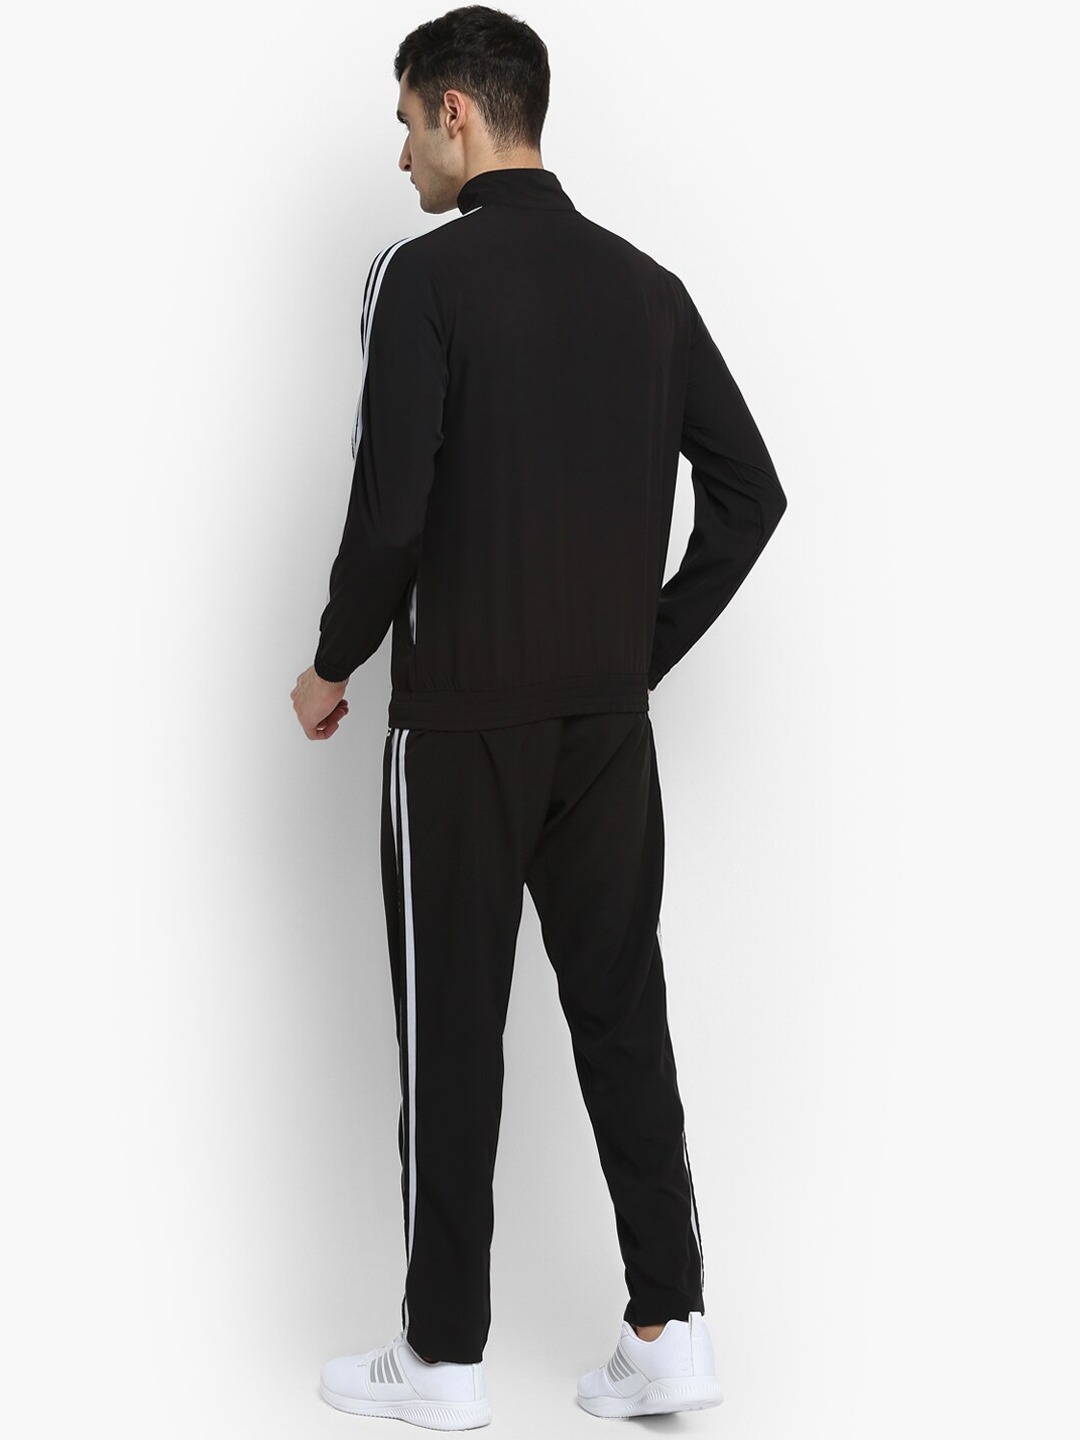 Clothing Tracksuits | OFF LIMITS Men Black Solid Tracksuit - KD46211